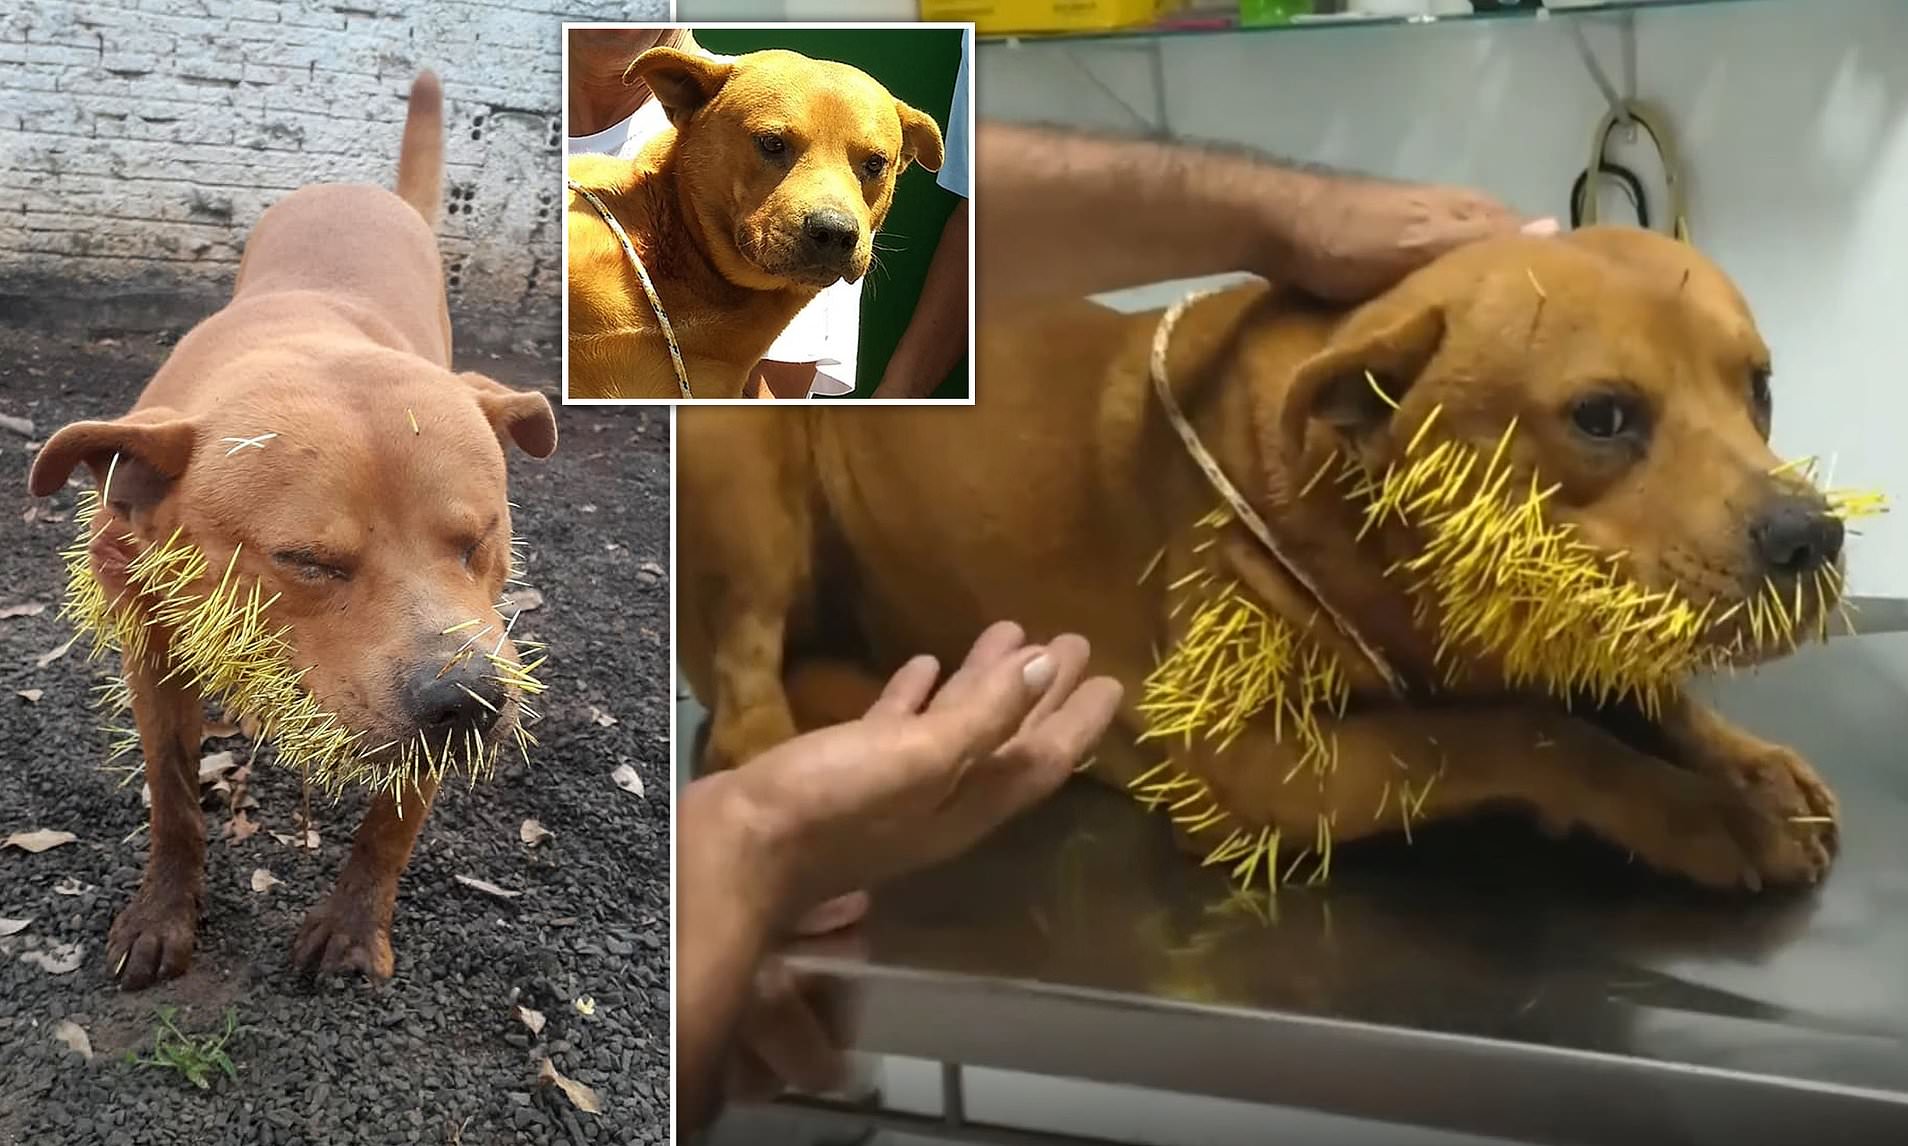 A prickly situation! Dog called Thor left with hundreds of quills stuck in its face in Brazil | Daily Mail Online